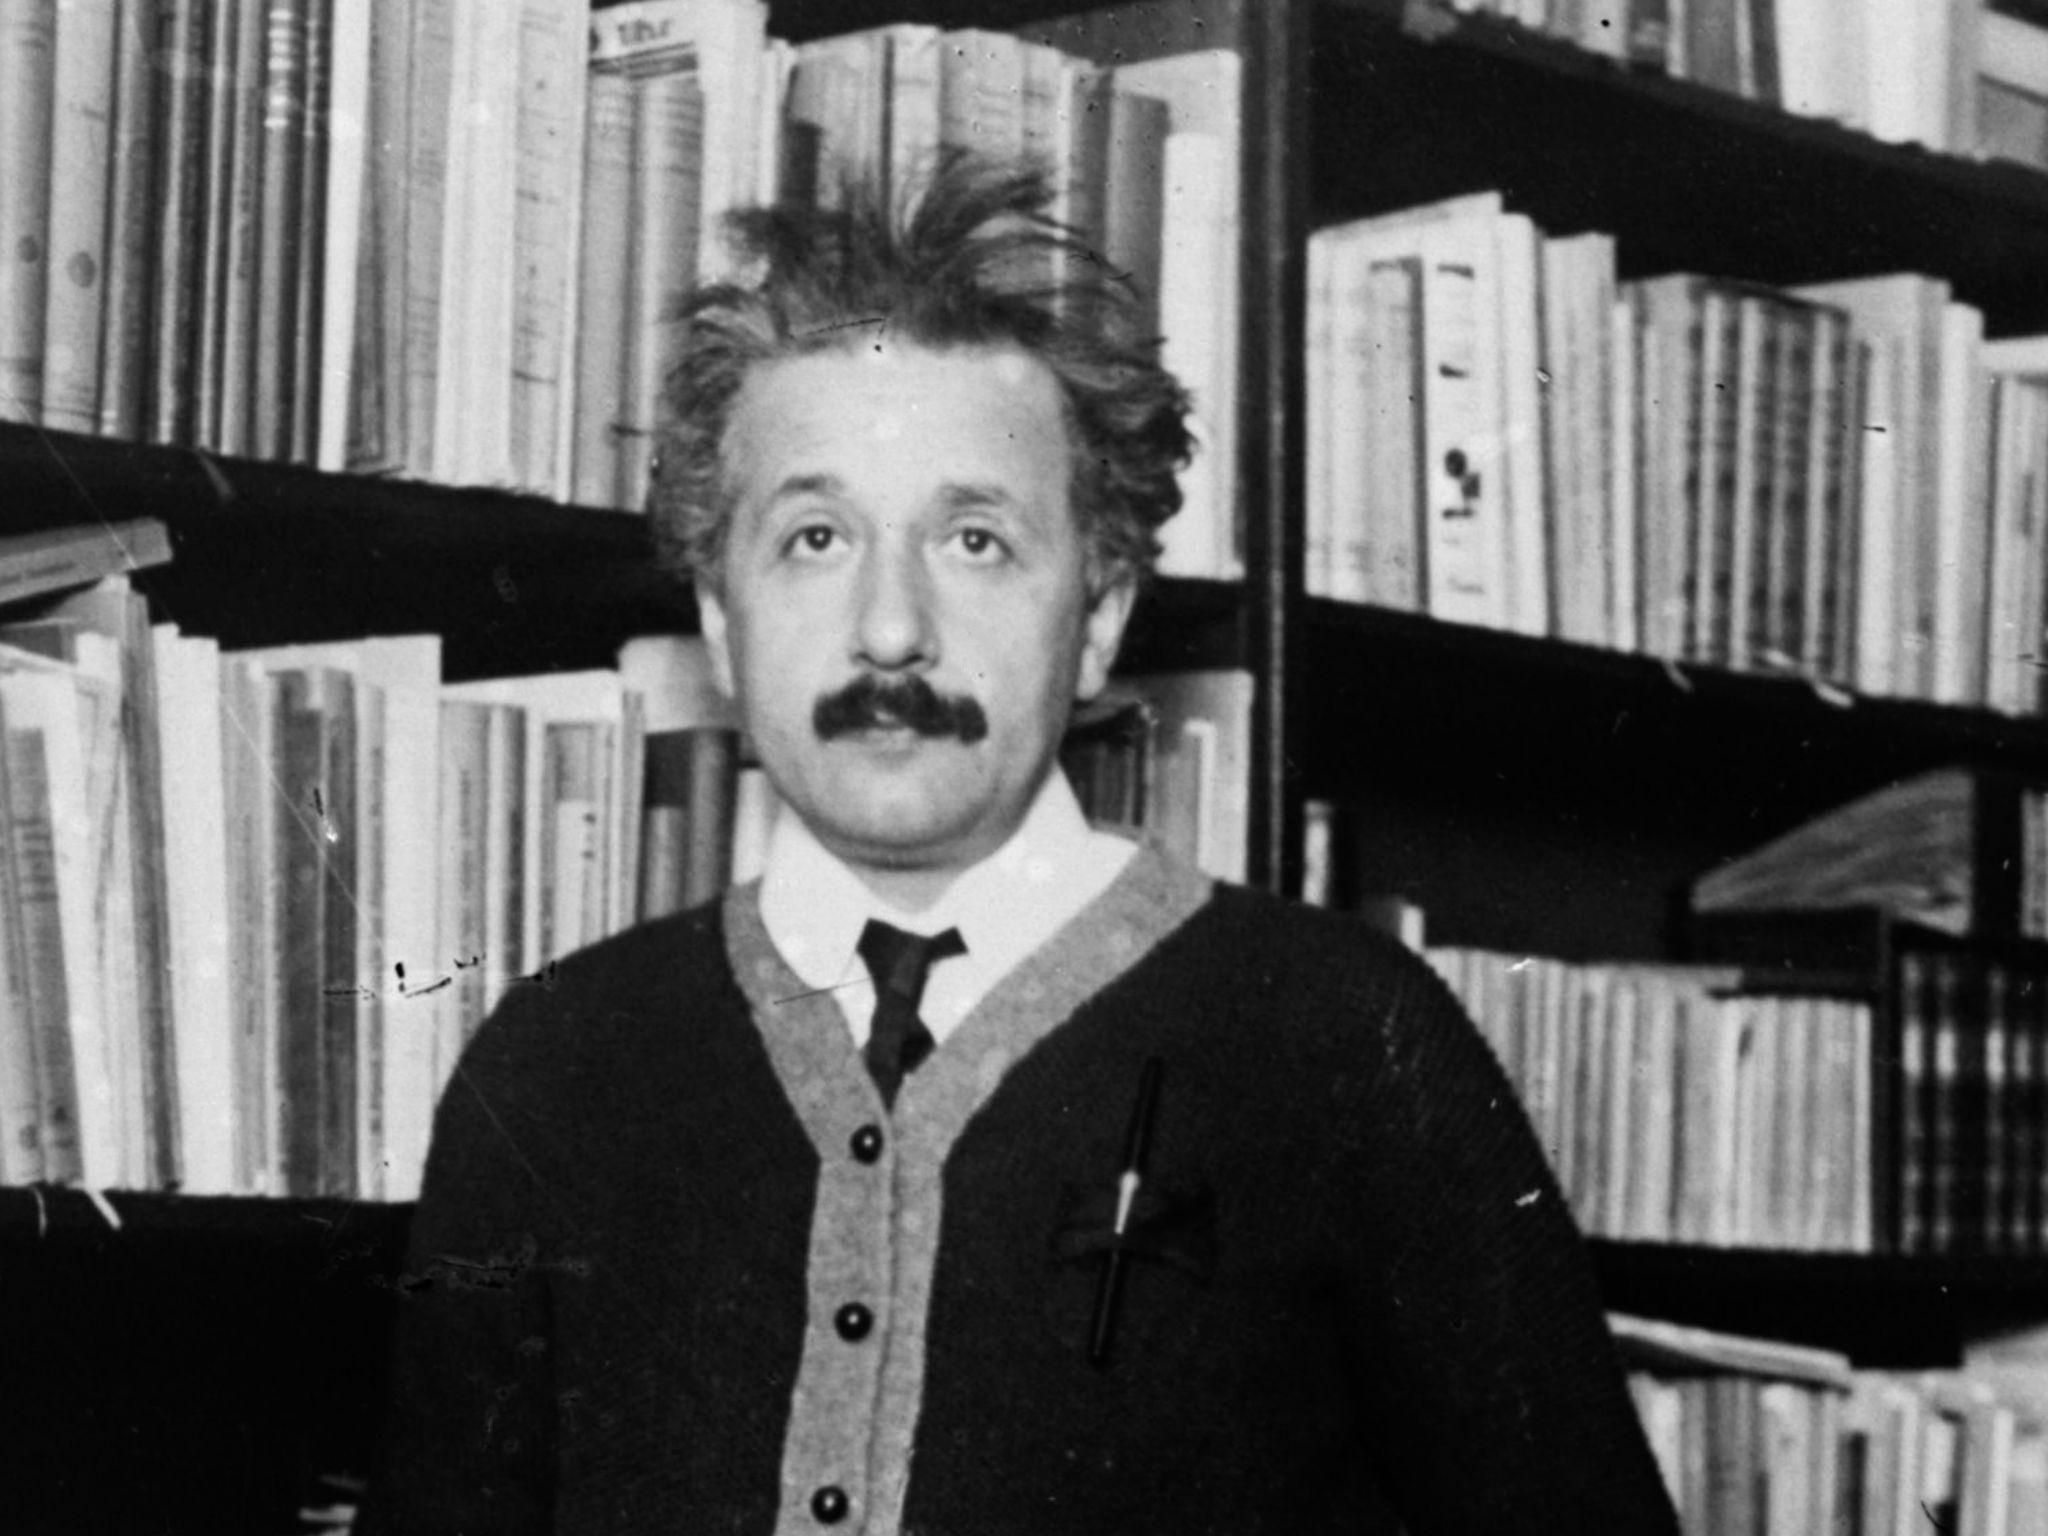 Einstein (above) was a German-born theoretical physicist who developed the theory of relativity